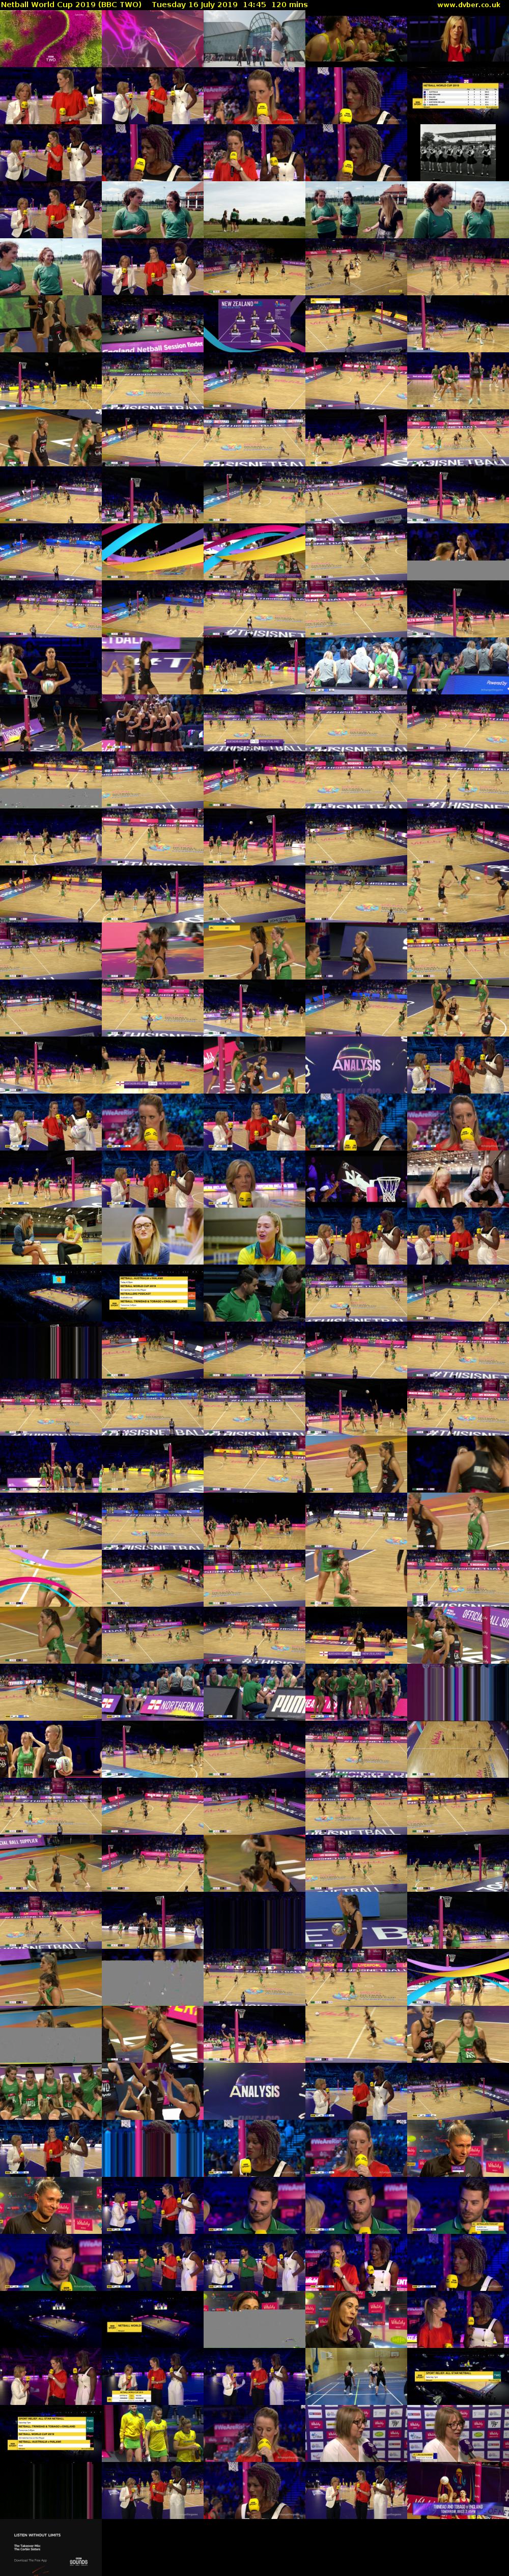 Netball World Cup 2019 (BBC TWO) Tuesday 16 July 2019 14:45 - 16:45